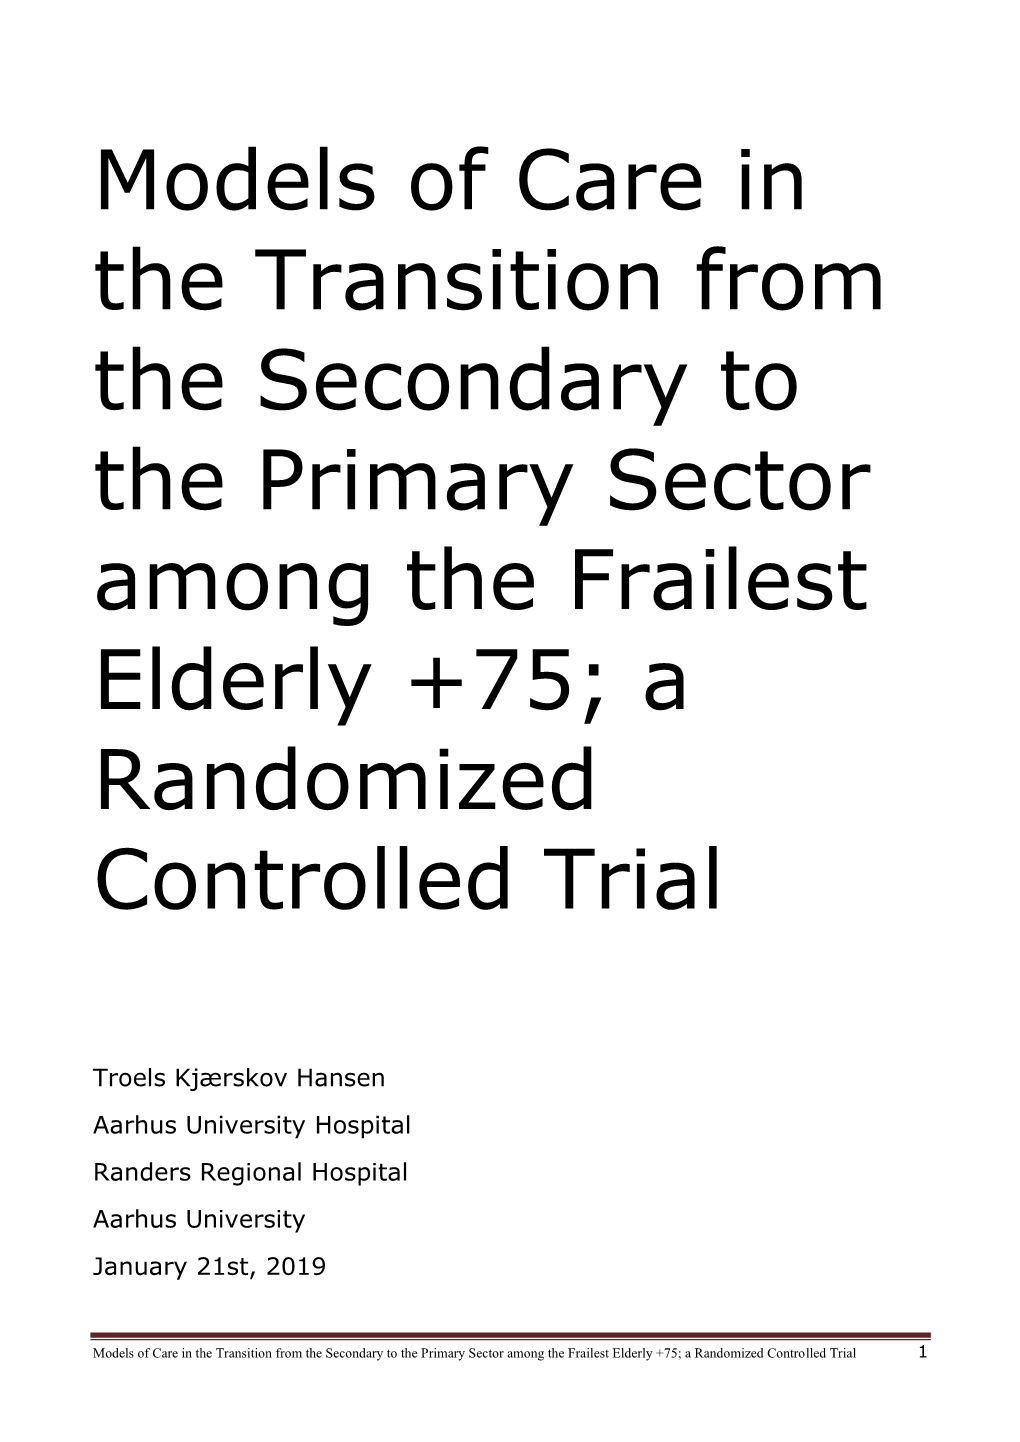 Models of Care in the Transition from the Secondary to the Primary Sector Among the Frailest Elderly +75; a Randomized Controlled Trial